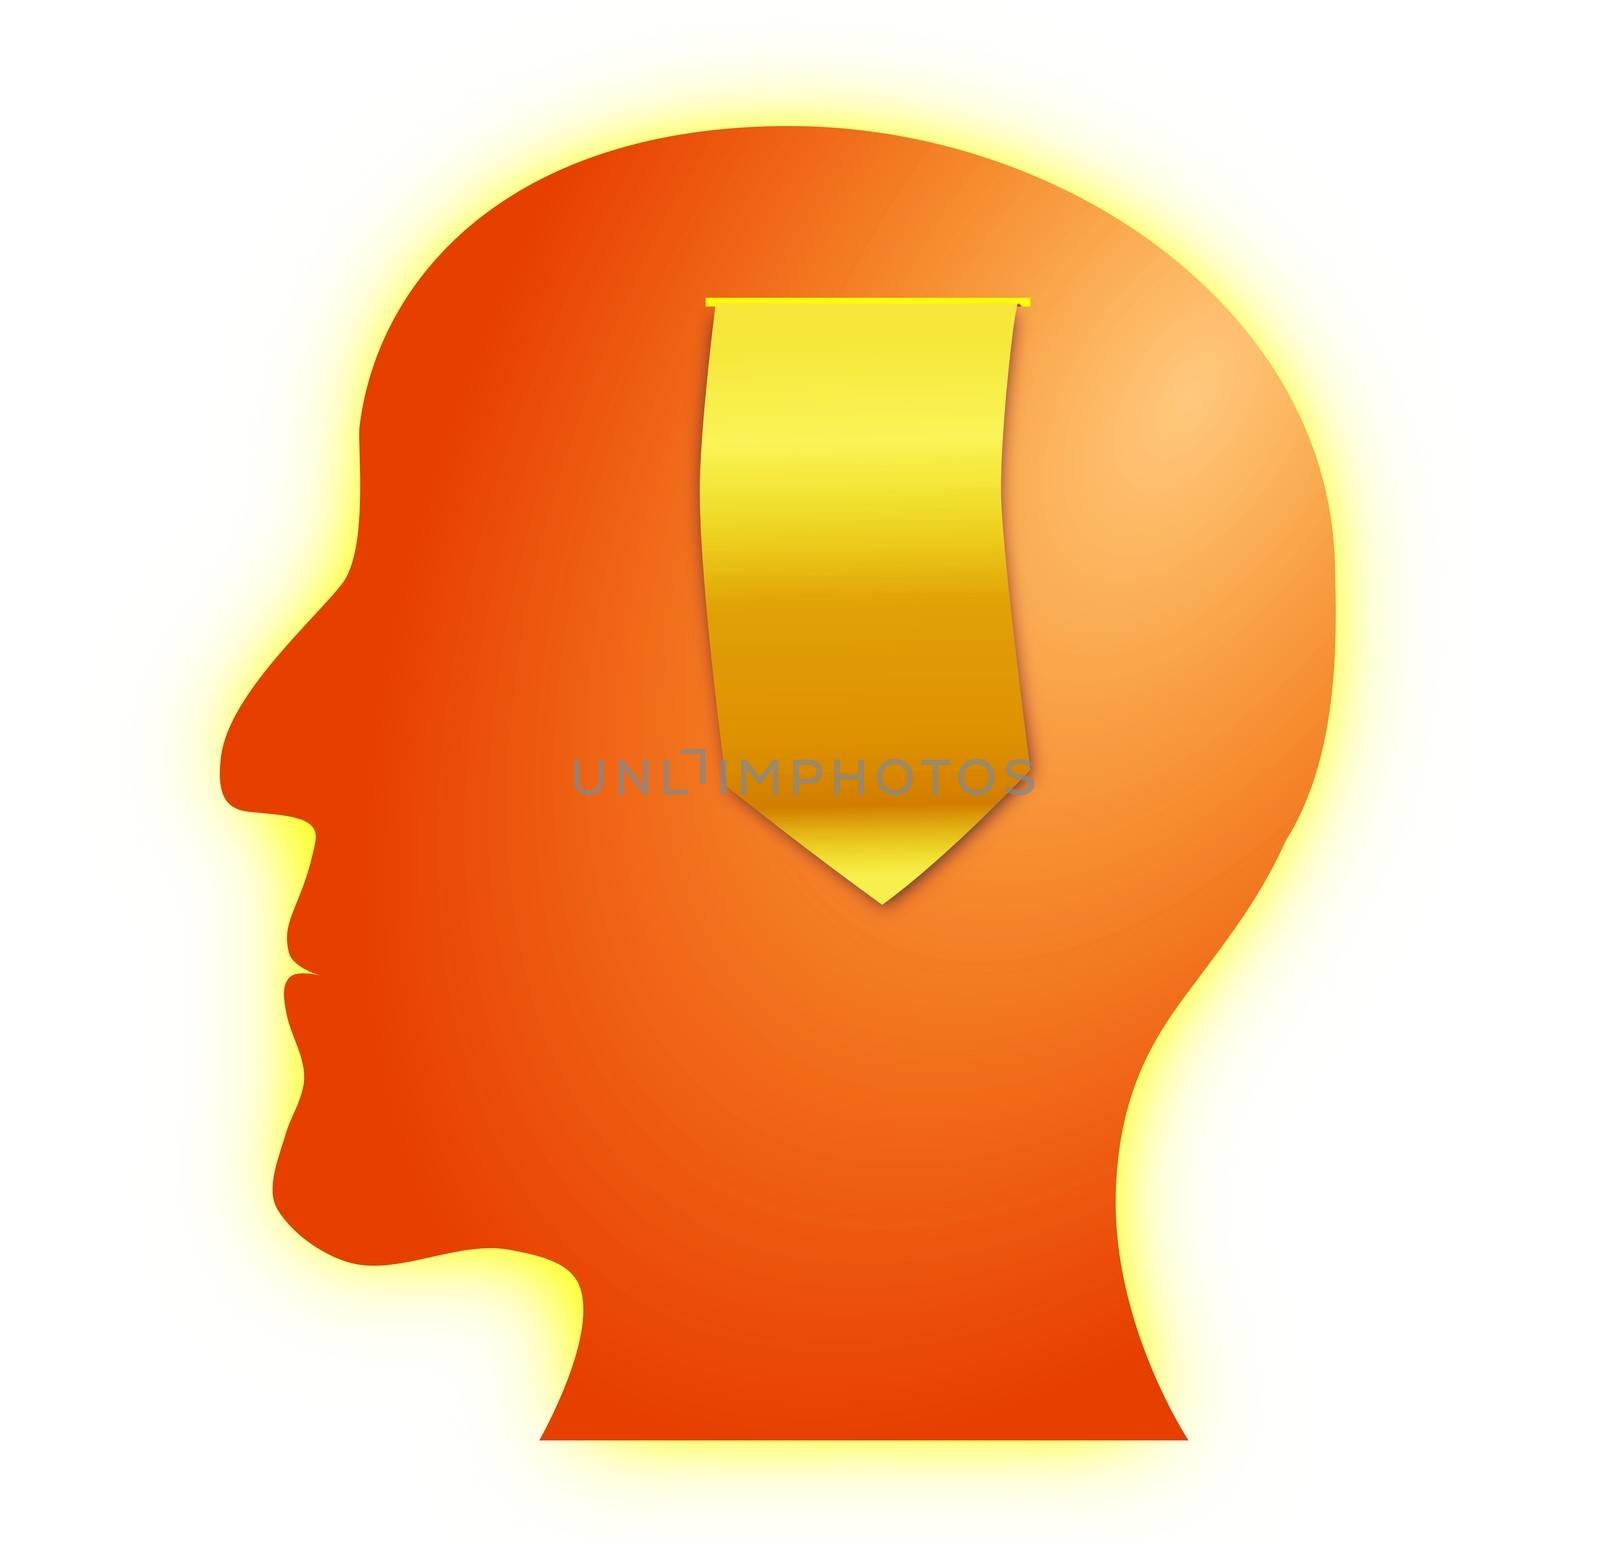 Concept of thinking or idea generation illustrated with a golden paper scroll coming out of a human head
